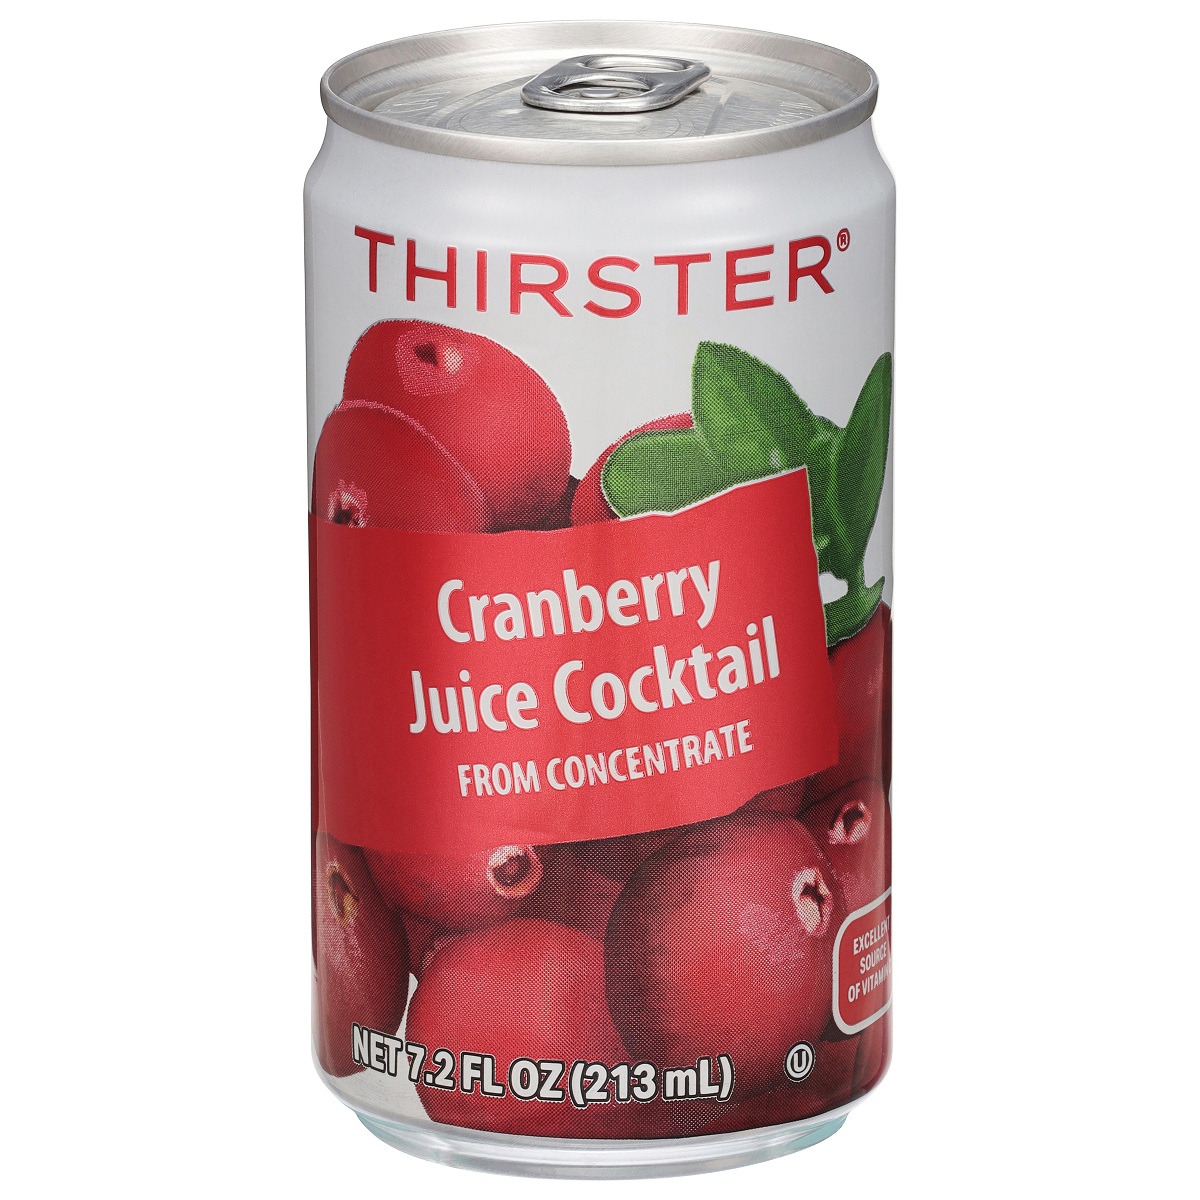 THIRSTER CRANBERRY COCKTAIL